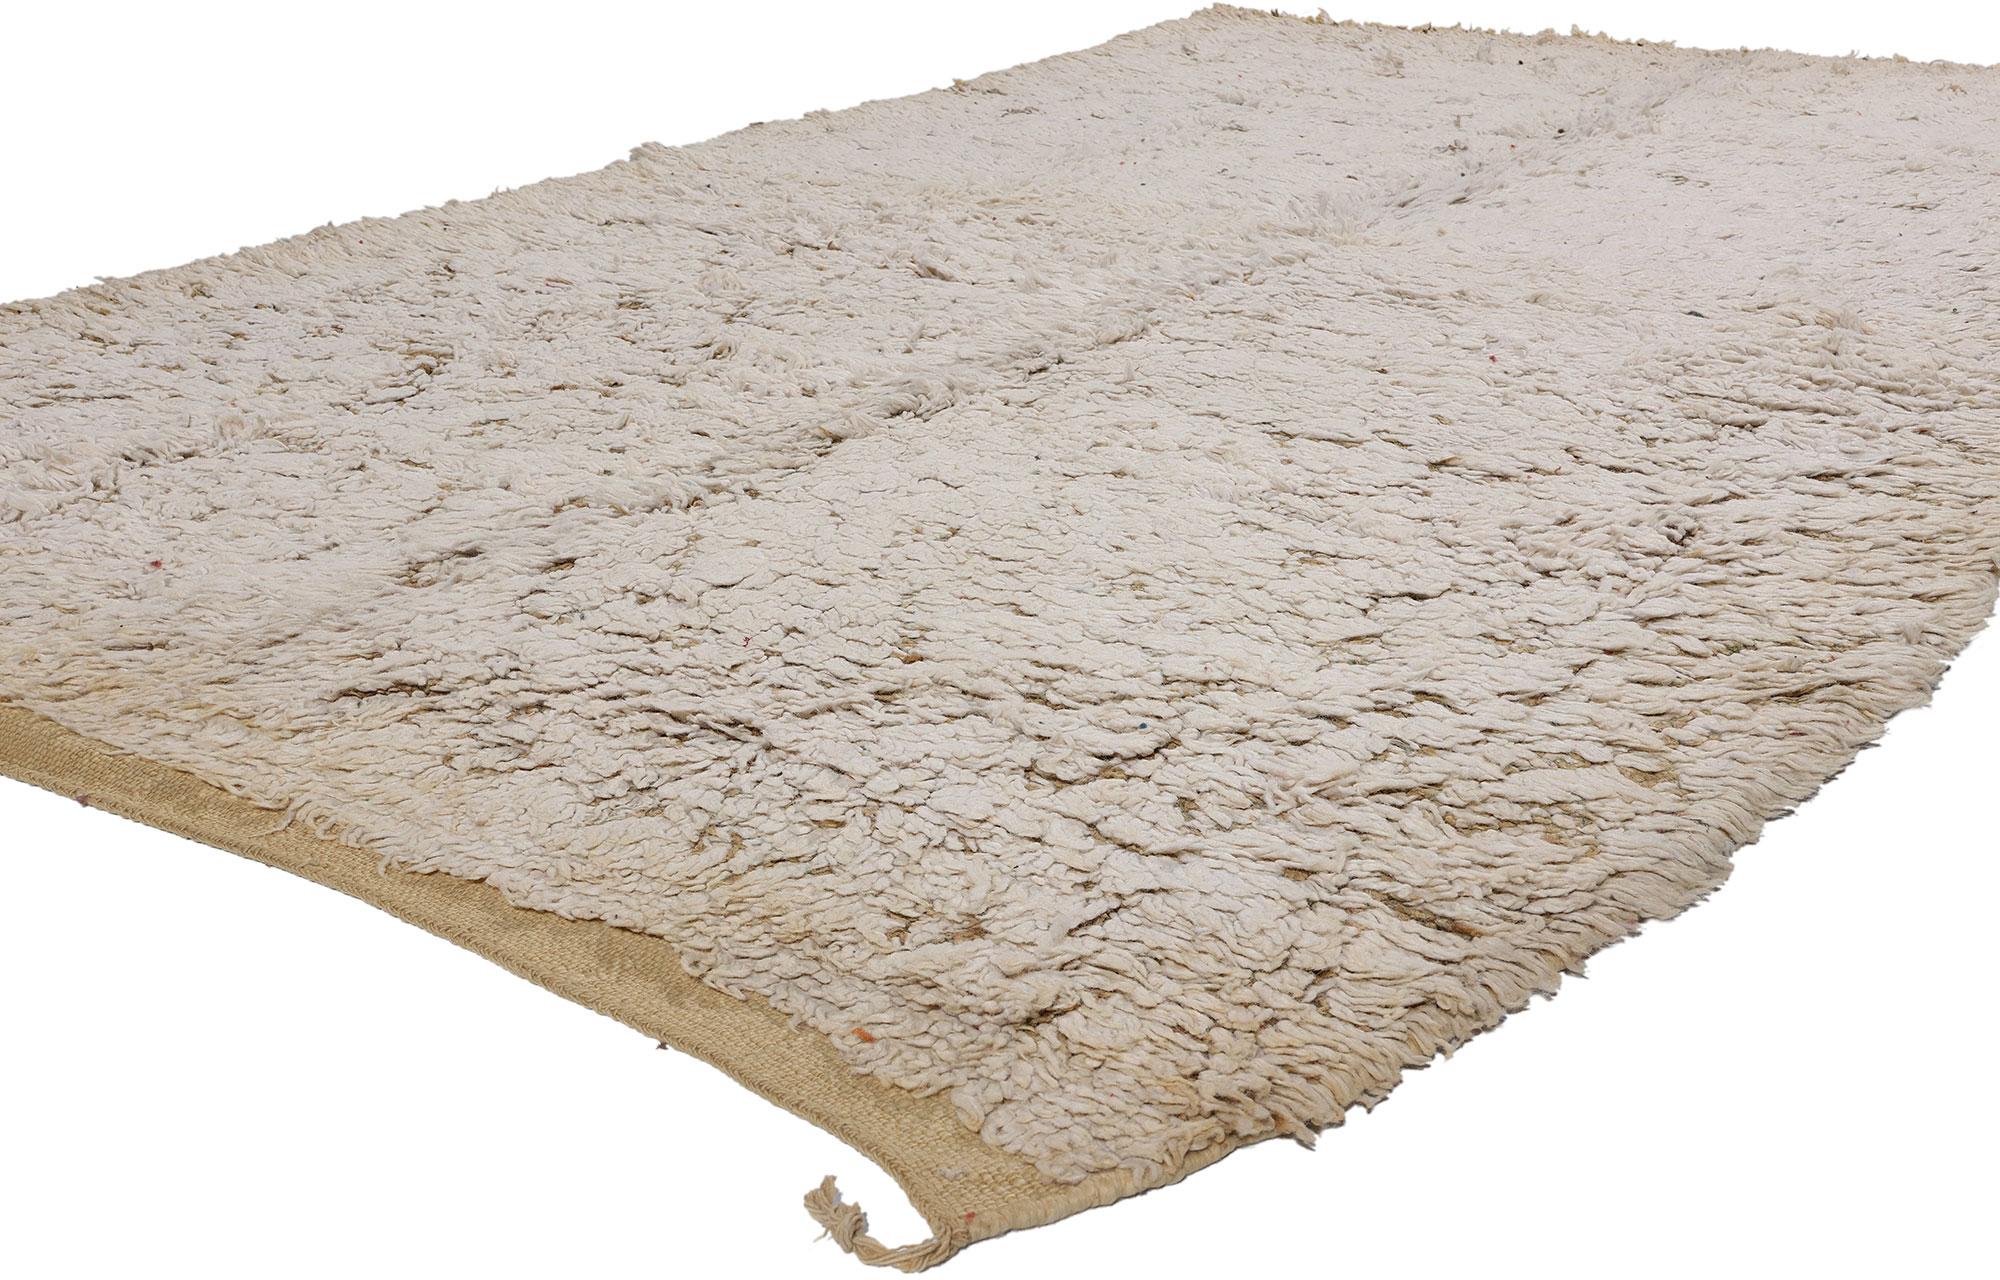 21800 Vintage Neutral Beni MGuild Moroccan Rug, 05'05 x 09'08. Beni MGuild Moroccan rugs are a type of traditional Moroccan rug originating from the Beni MGuild tribe, which is located in the Middle Atlas Mountains of Morocco. These rugs are